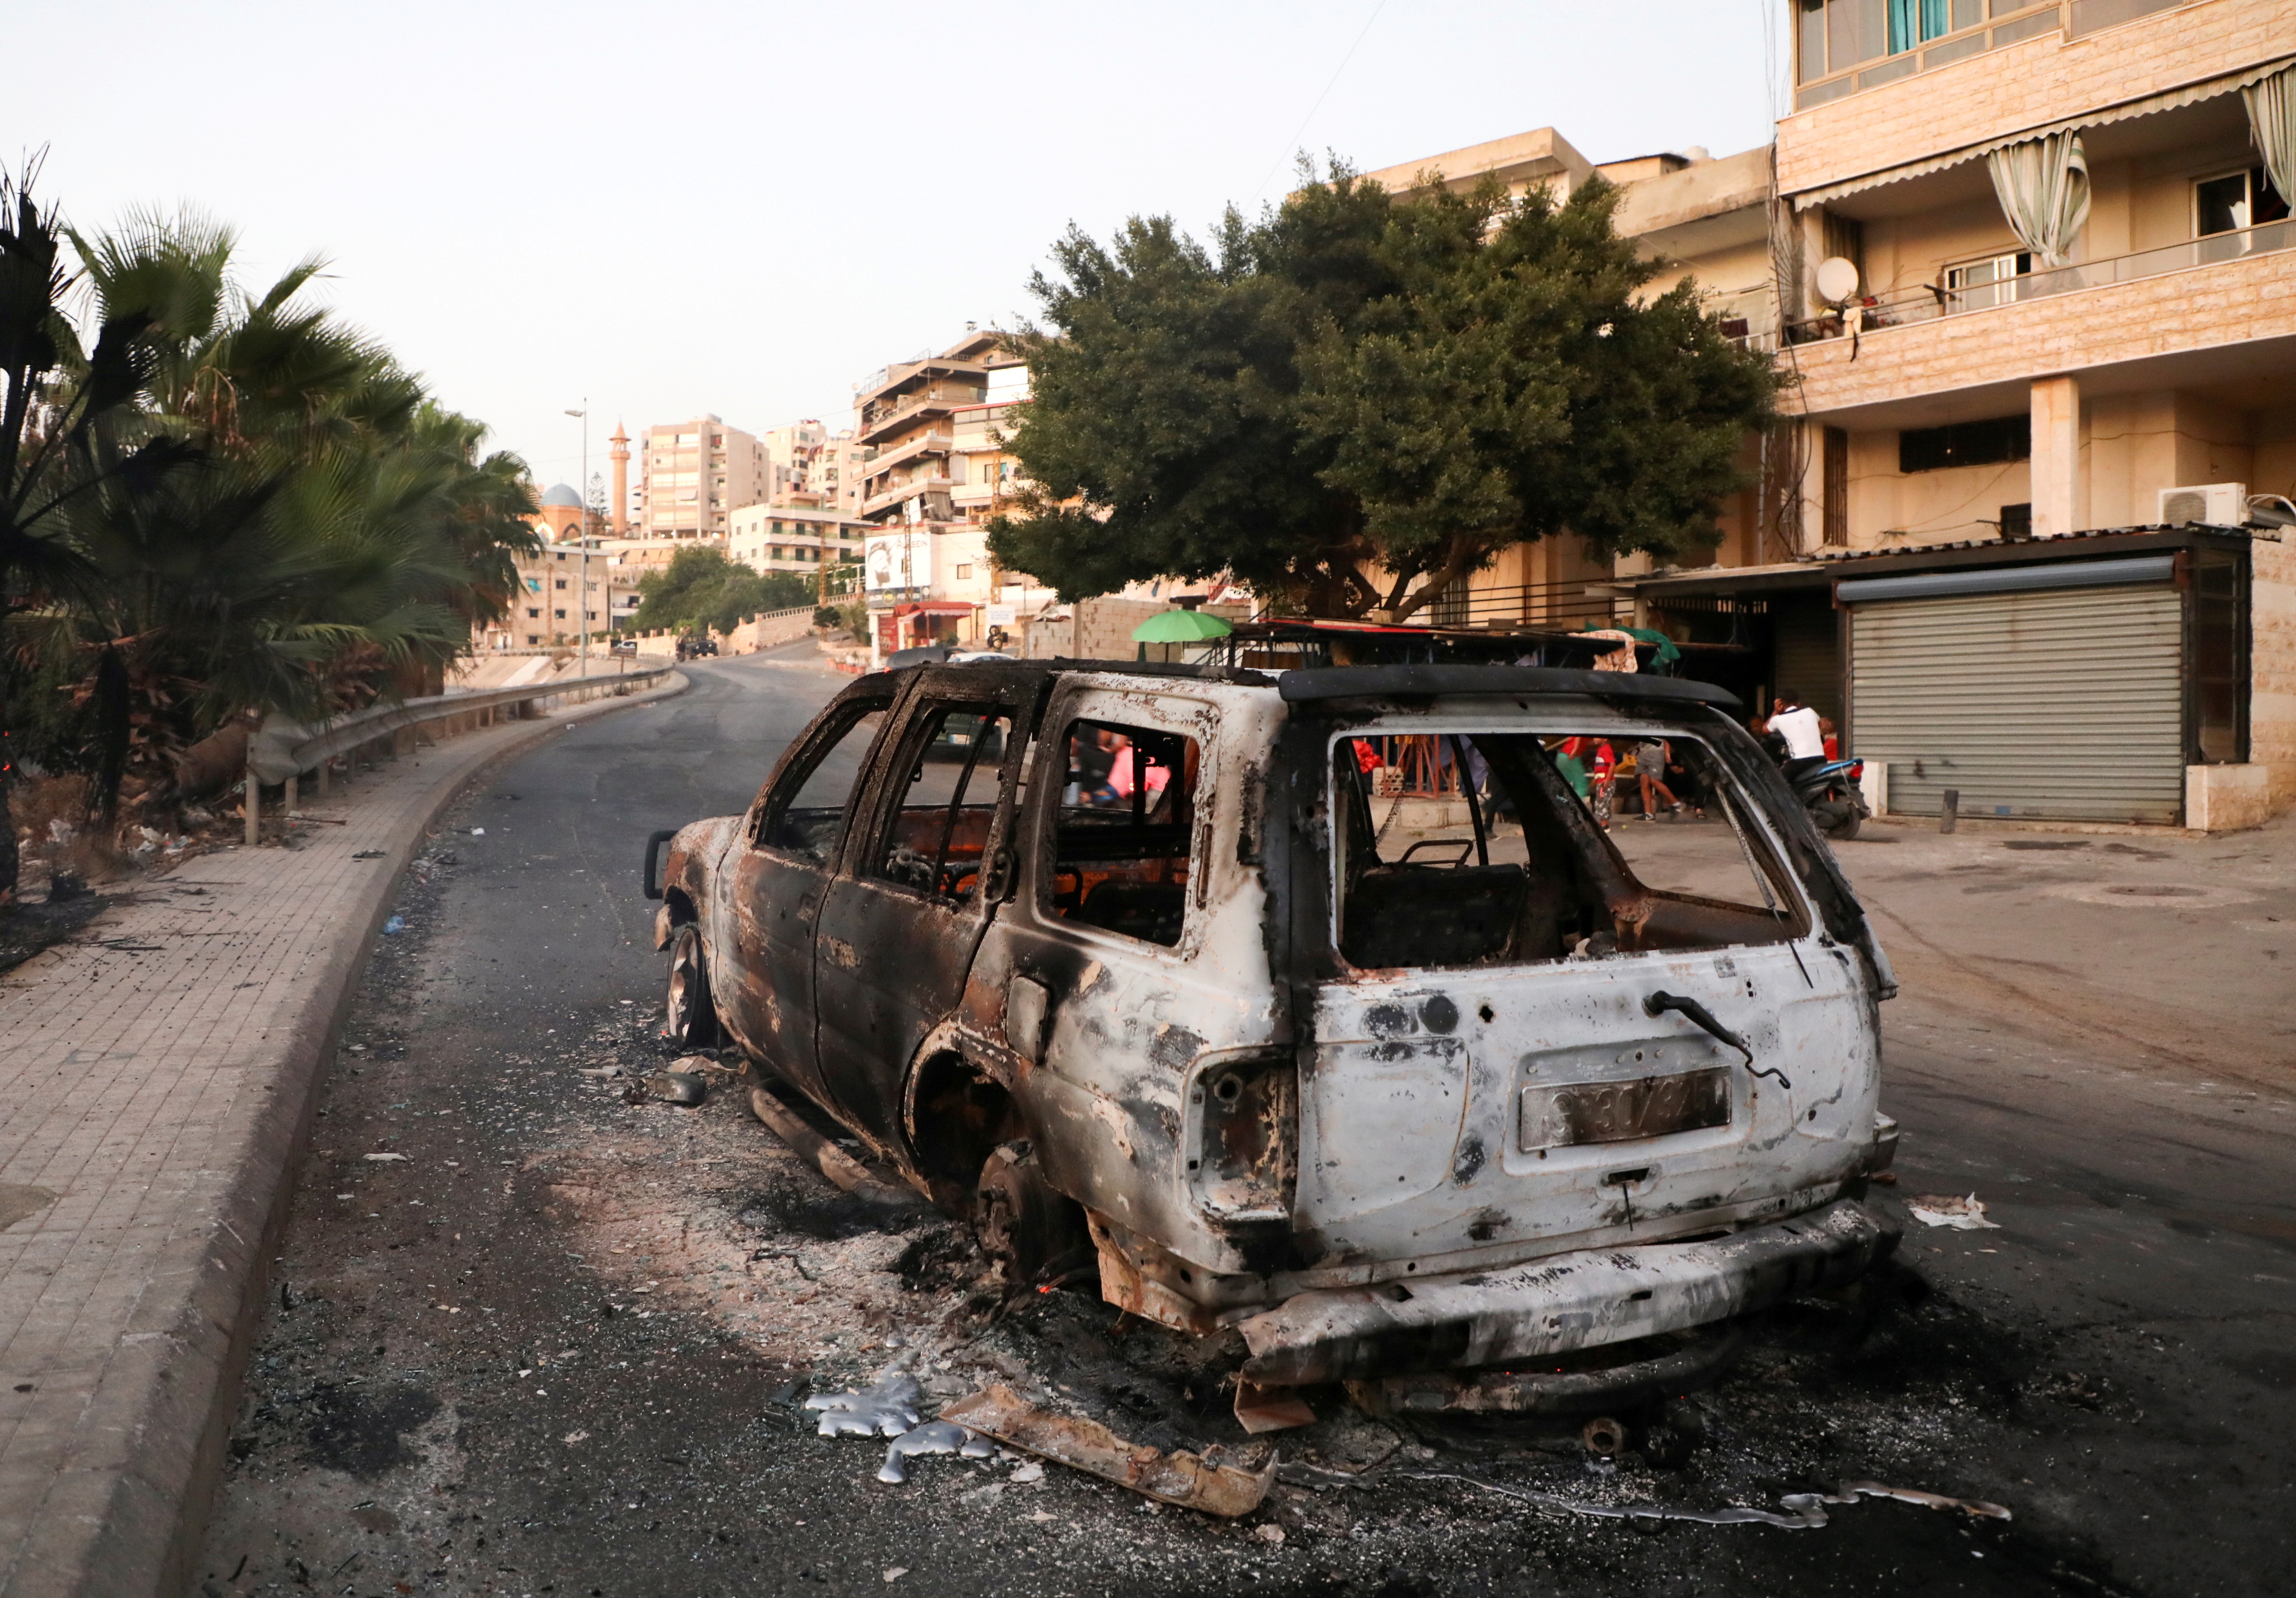 A burnt car is seen after an ambush on Shi'ite mourners, in Khaldeh